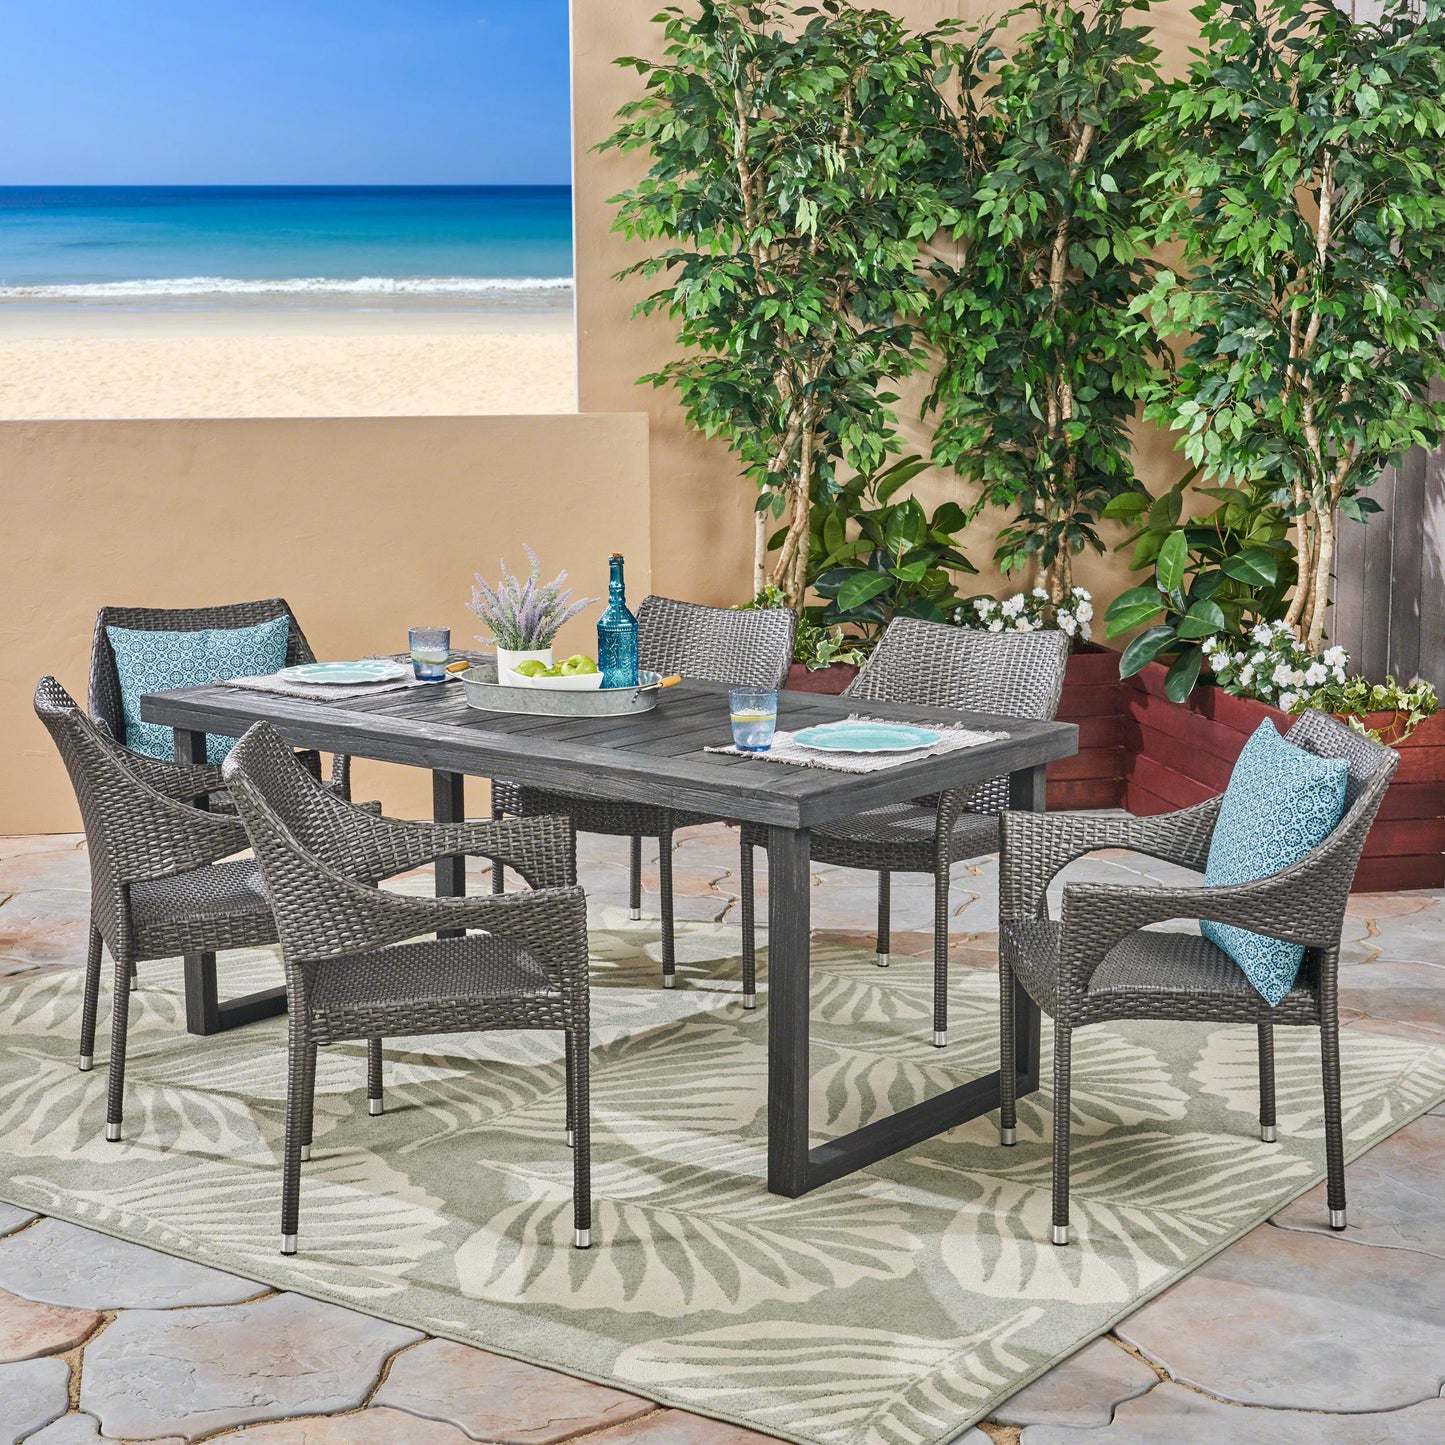 Joa Outdoor 7 Piece Acacia Wood Dining Set with Stacking Wicker Chairs, Sandblast Dark Gray and Gray